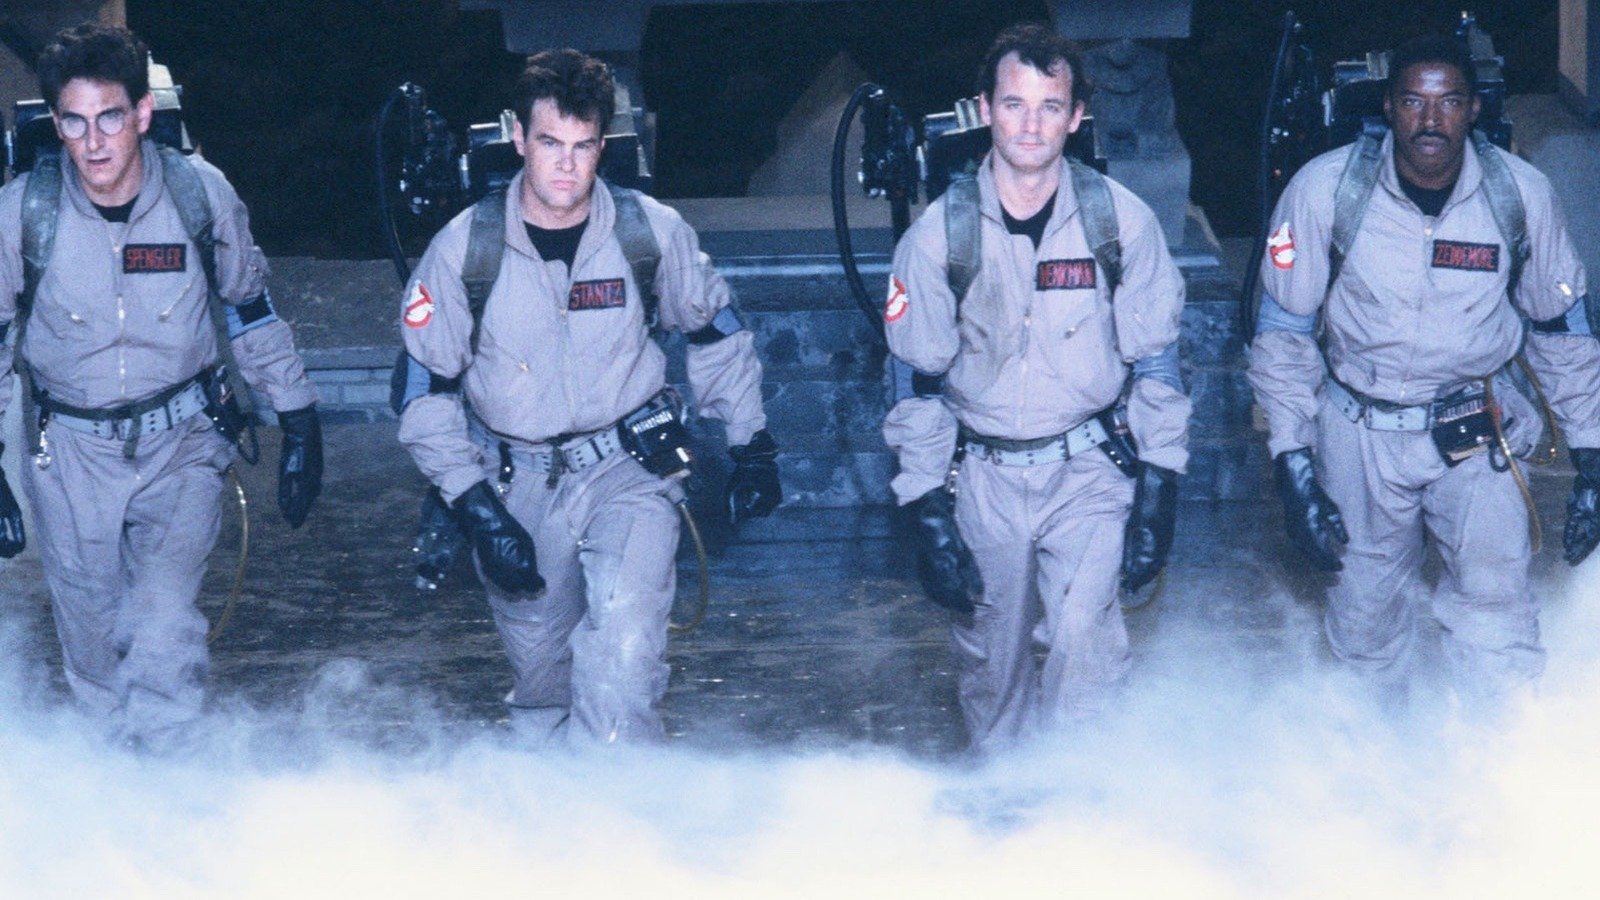 The Ghostbusters Uniforms Have Special Tubes In Case They Pee Their Pants (Seriously)